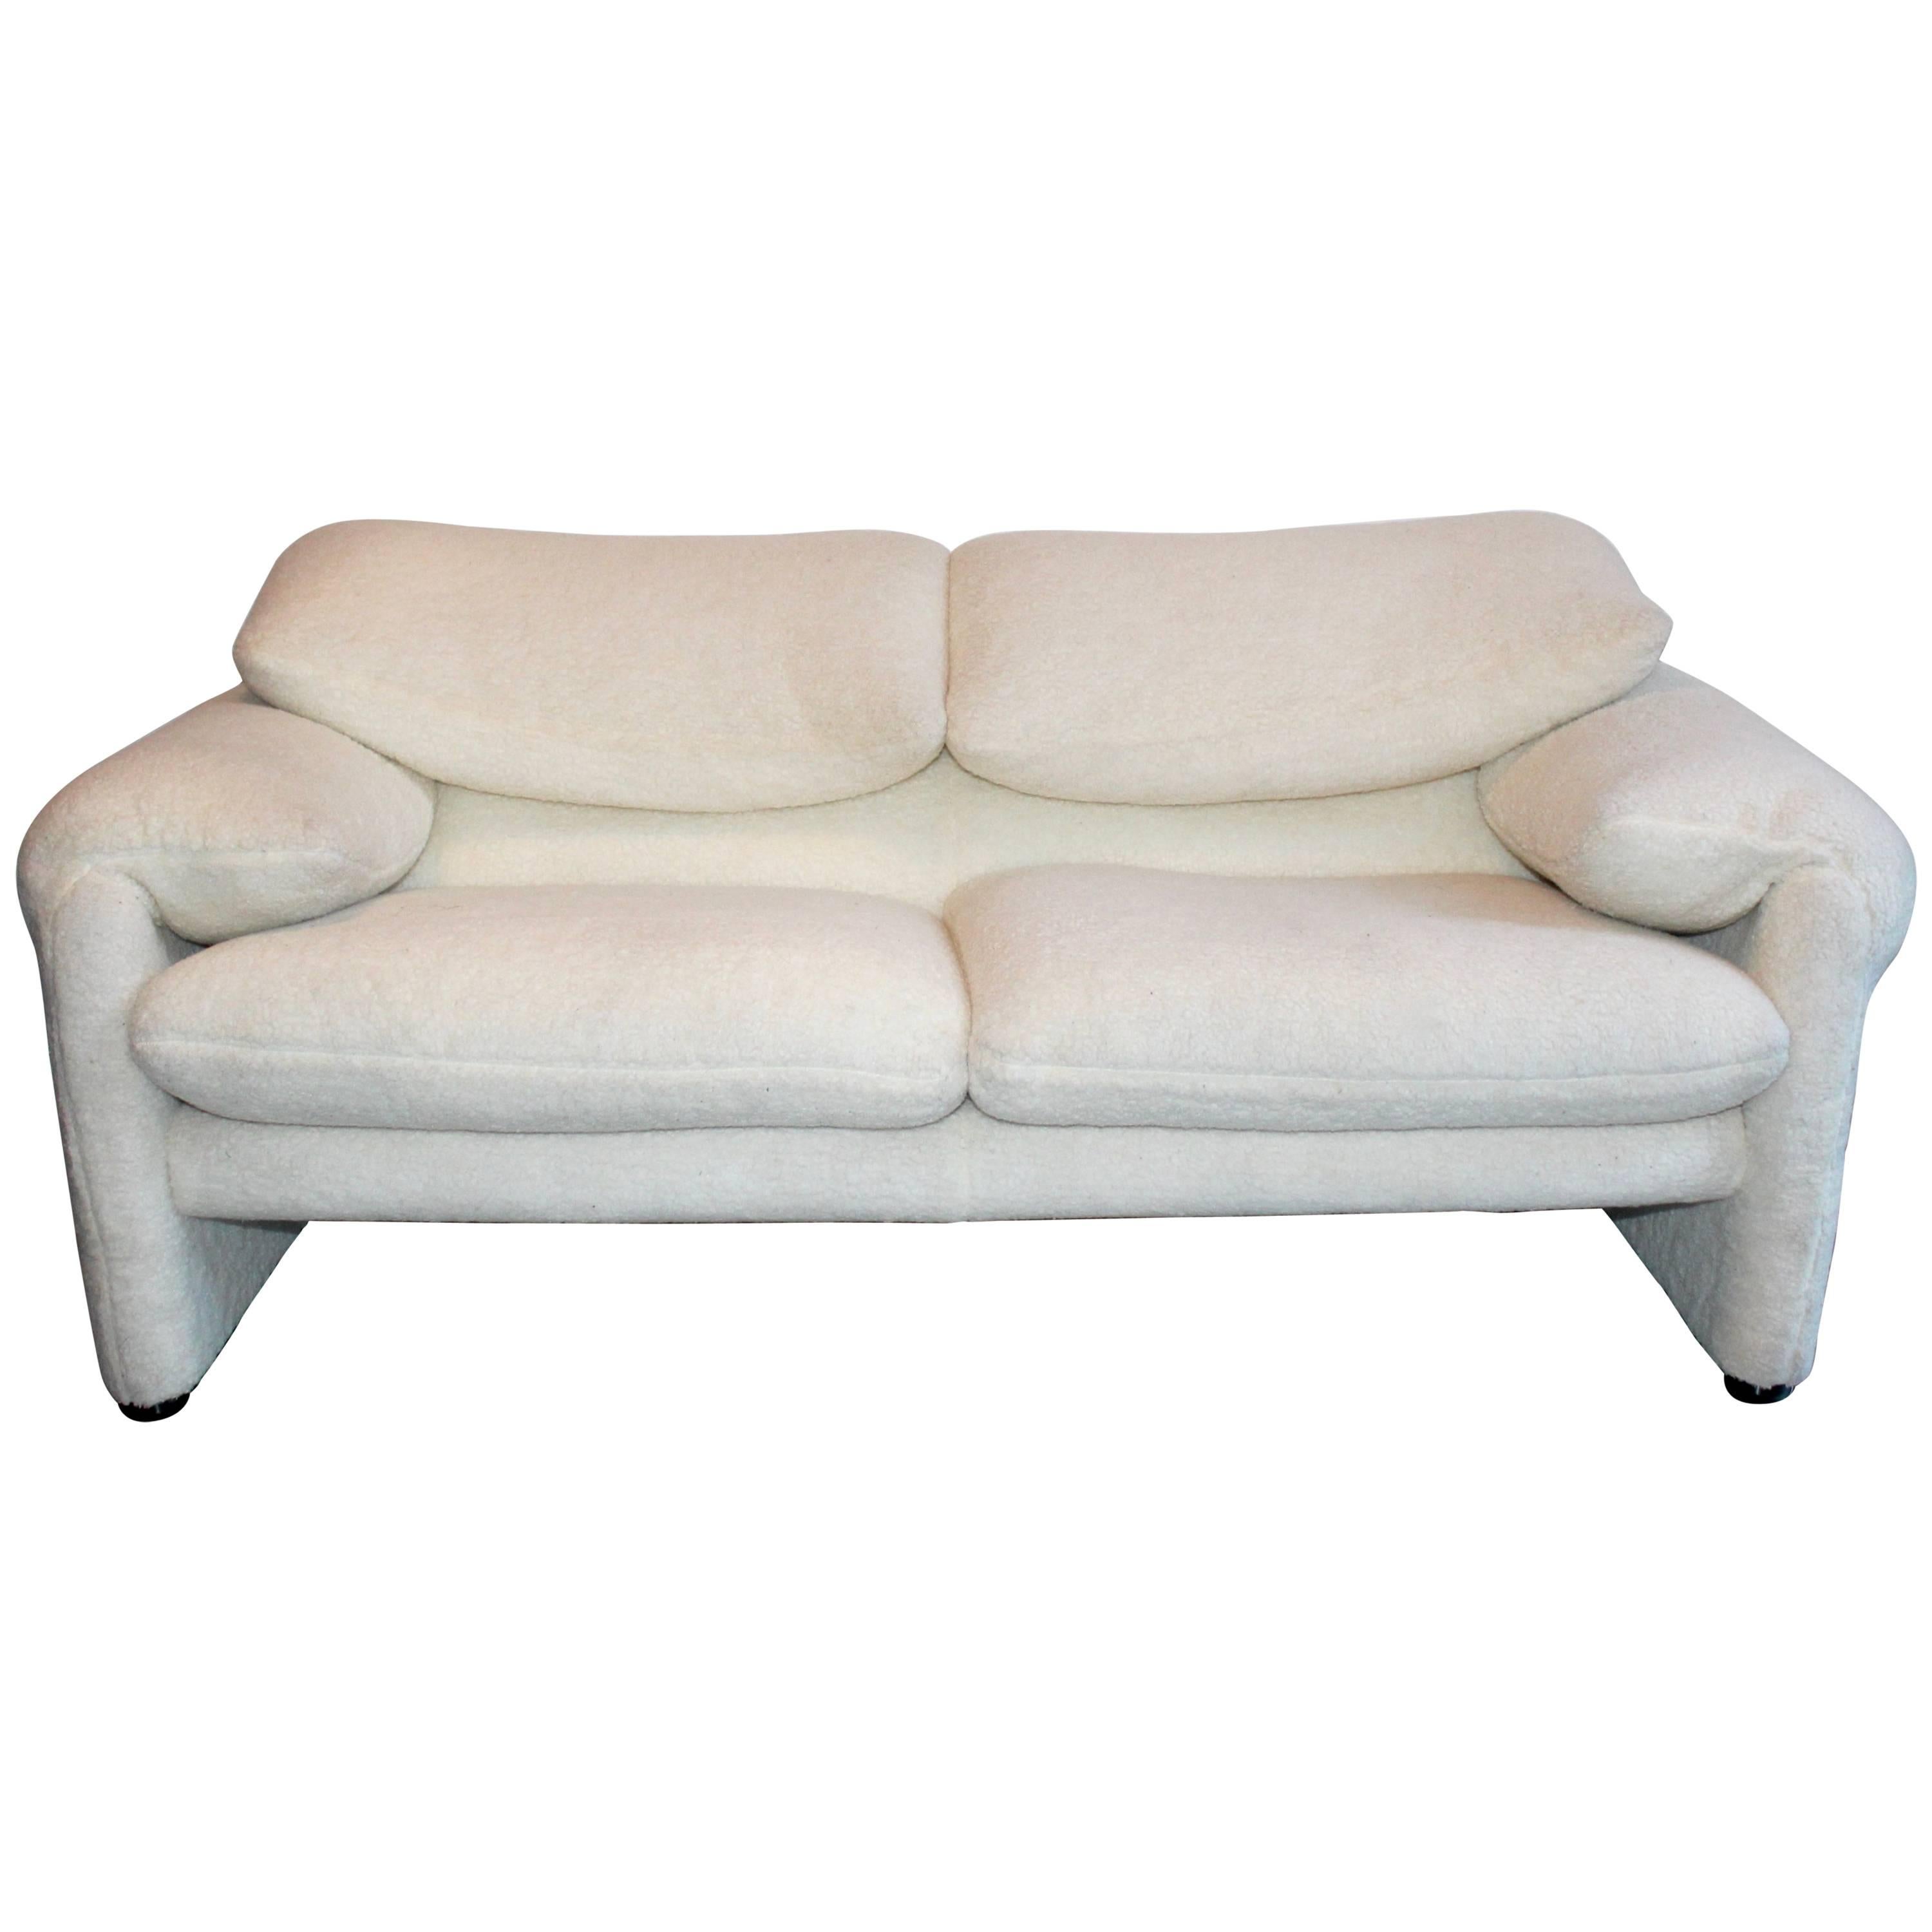 Cassina Maralunga Designer Sofa Wool White Two-Seat Function Couch Modern For Sale